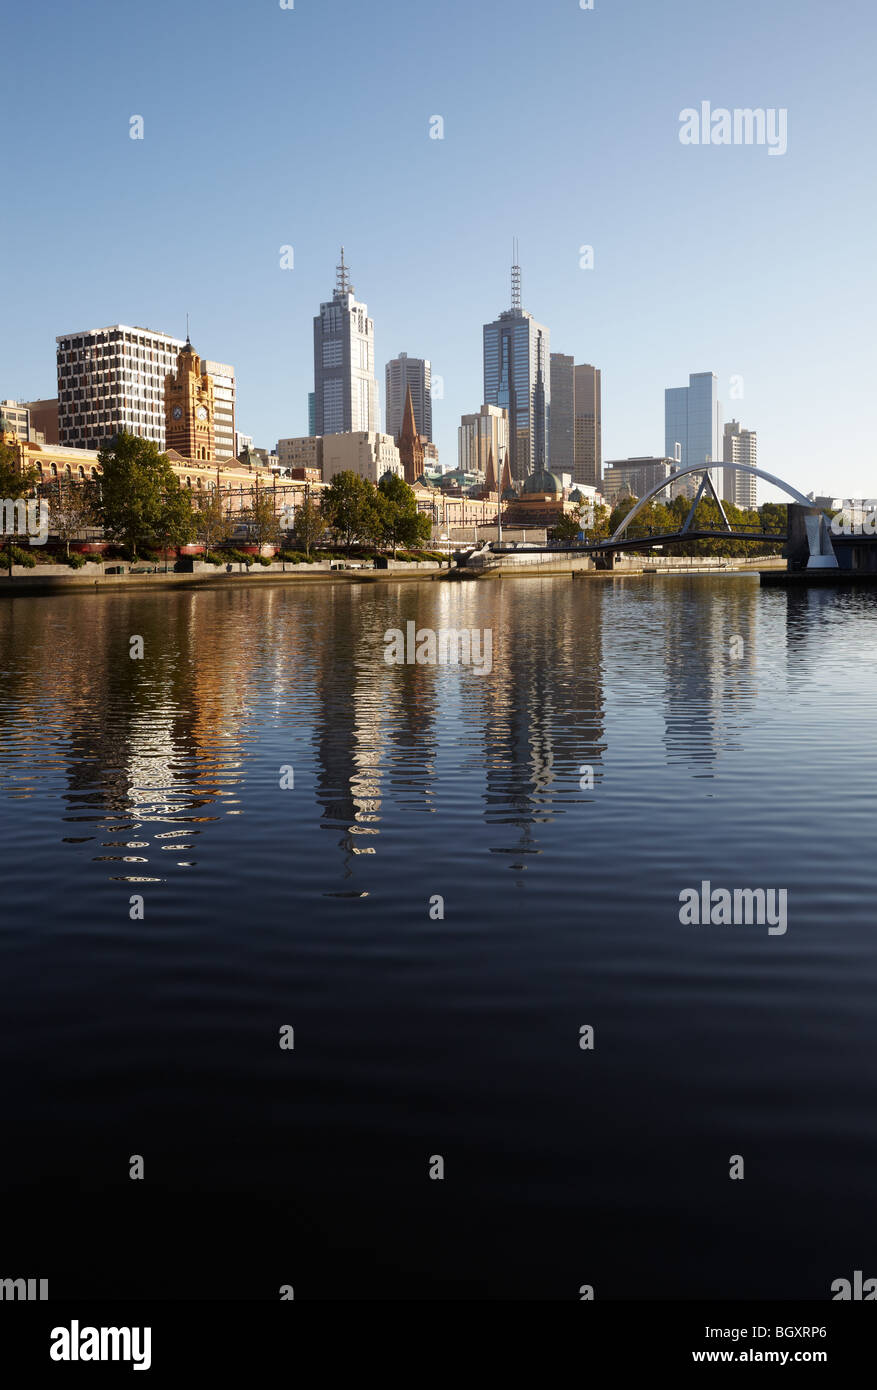 Early morning reflections of the city skyline in the Yarra river, Melbourne, Victoria, Australia Stock Photo